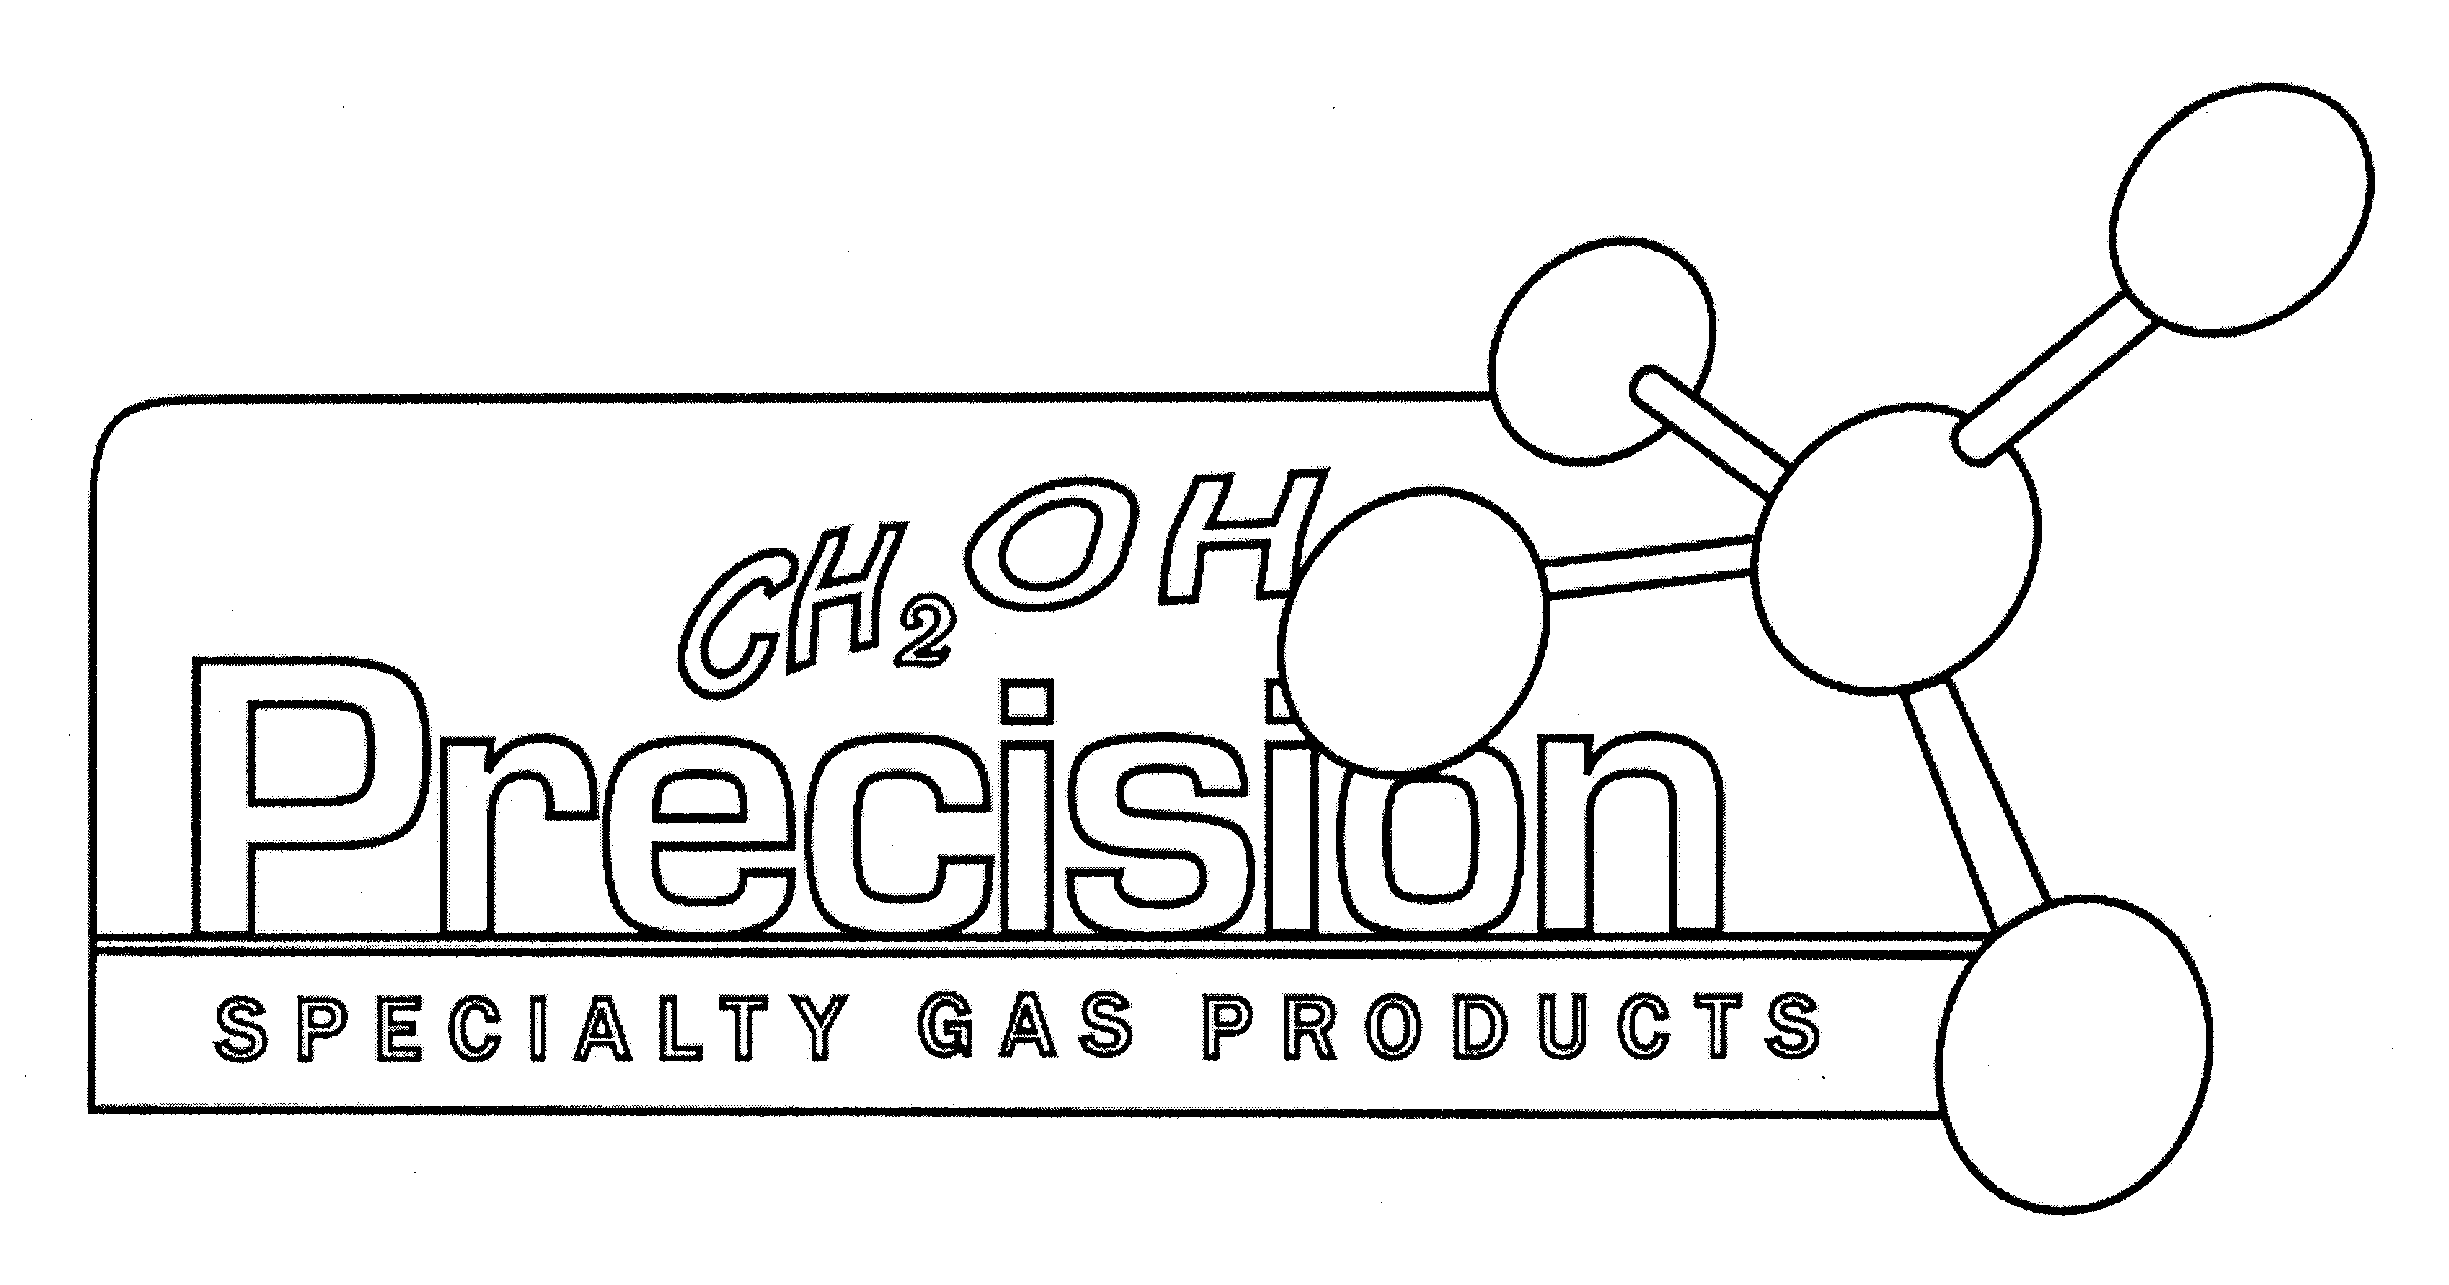  CH2OH PRECISION SPECIALTY GAS PRODUCTS